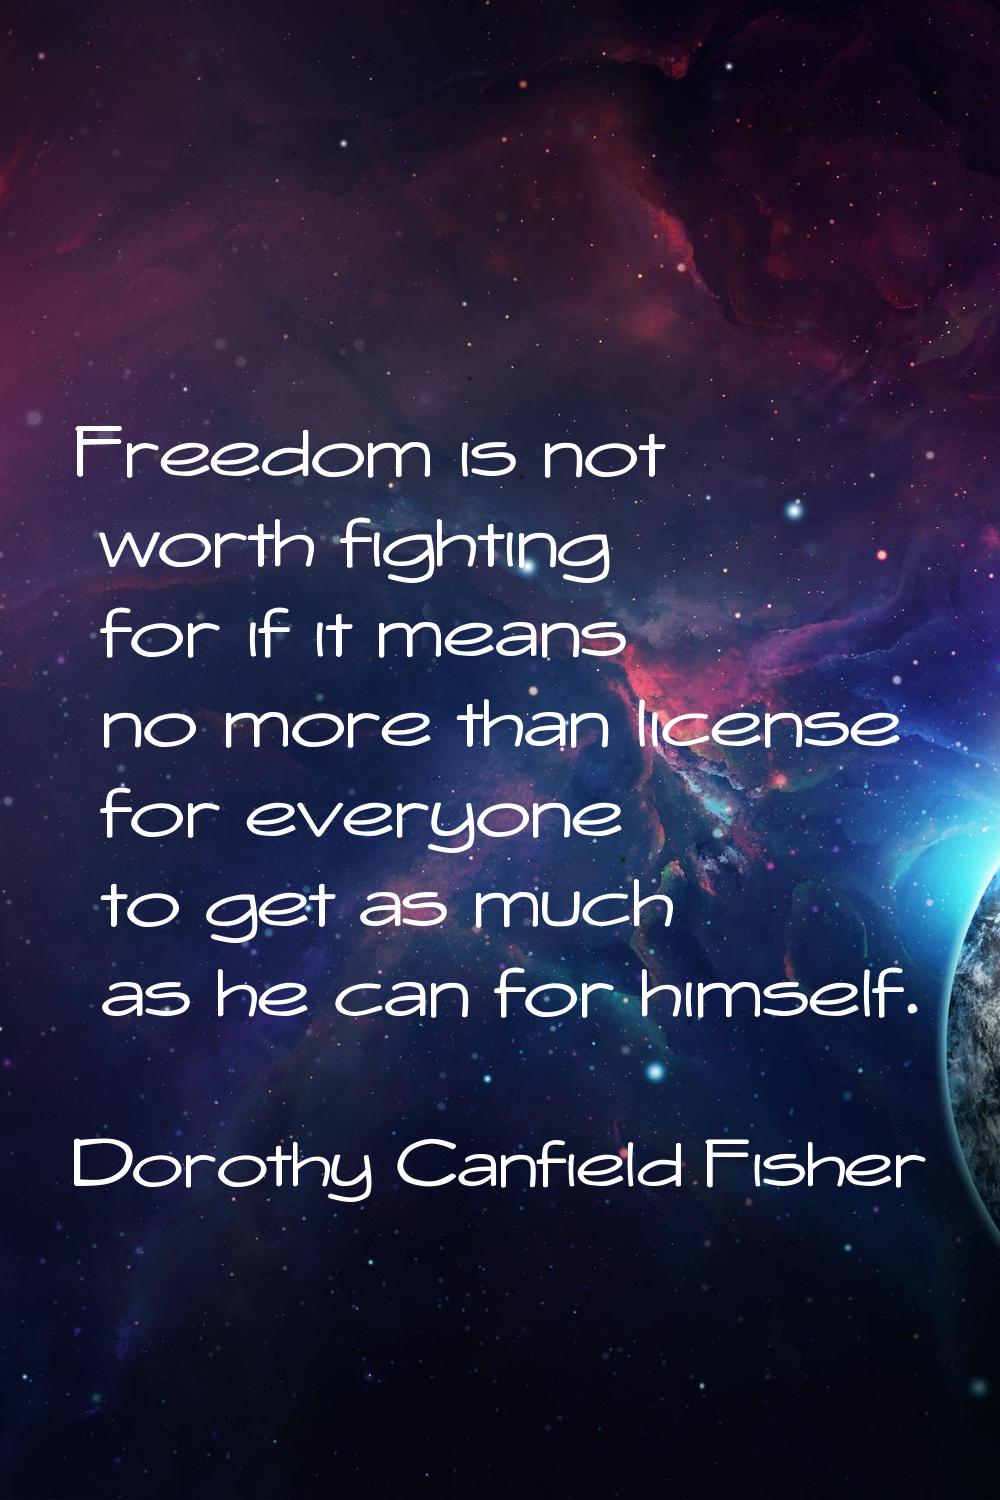 Freedom is not worth fighting for if it means no more than license for everyone to get as much as h